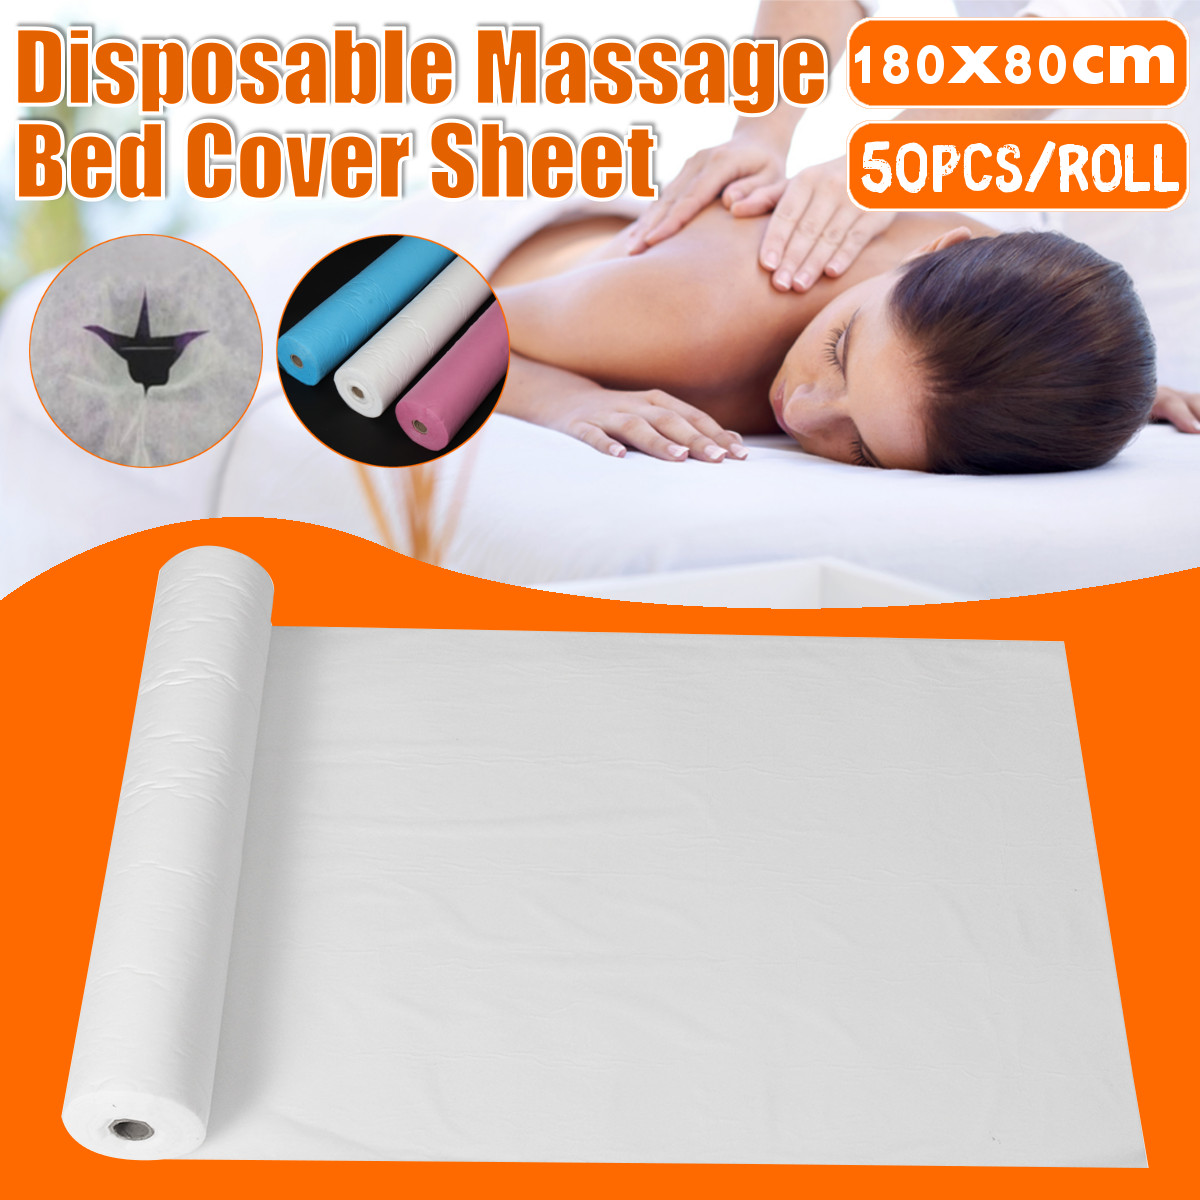 180x80cm-50PcsRoll-Disposable-Massage-Table-Bed-Cover-Sheet-Beauty-Waxing-1737148-1